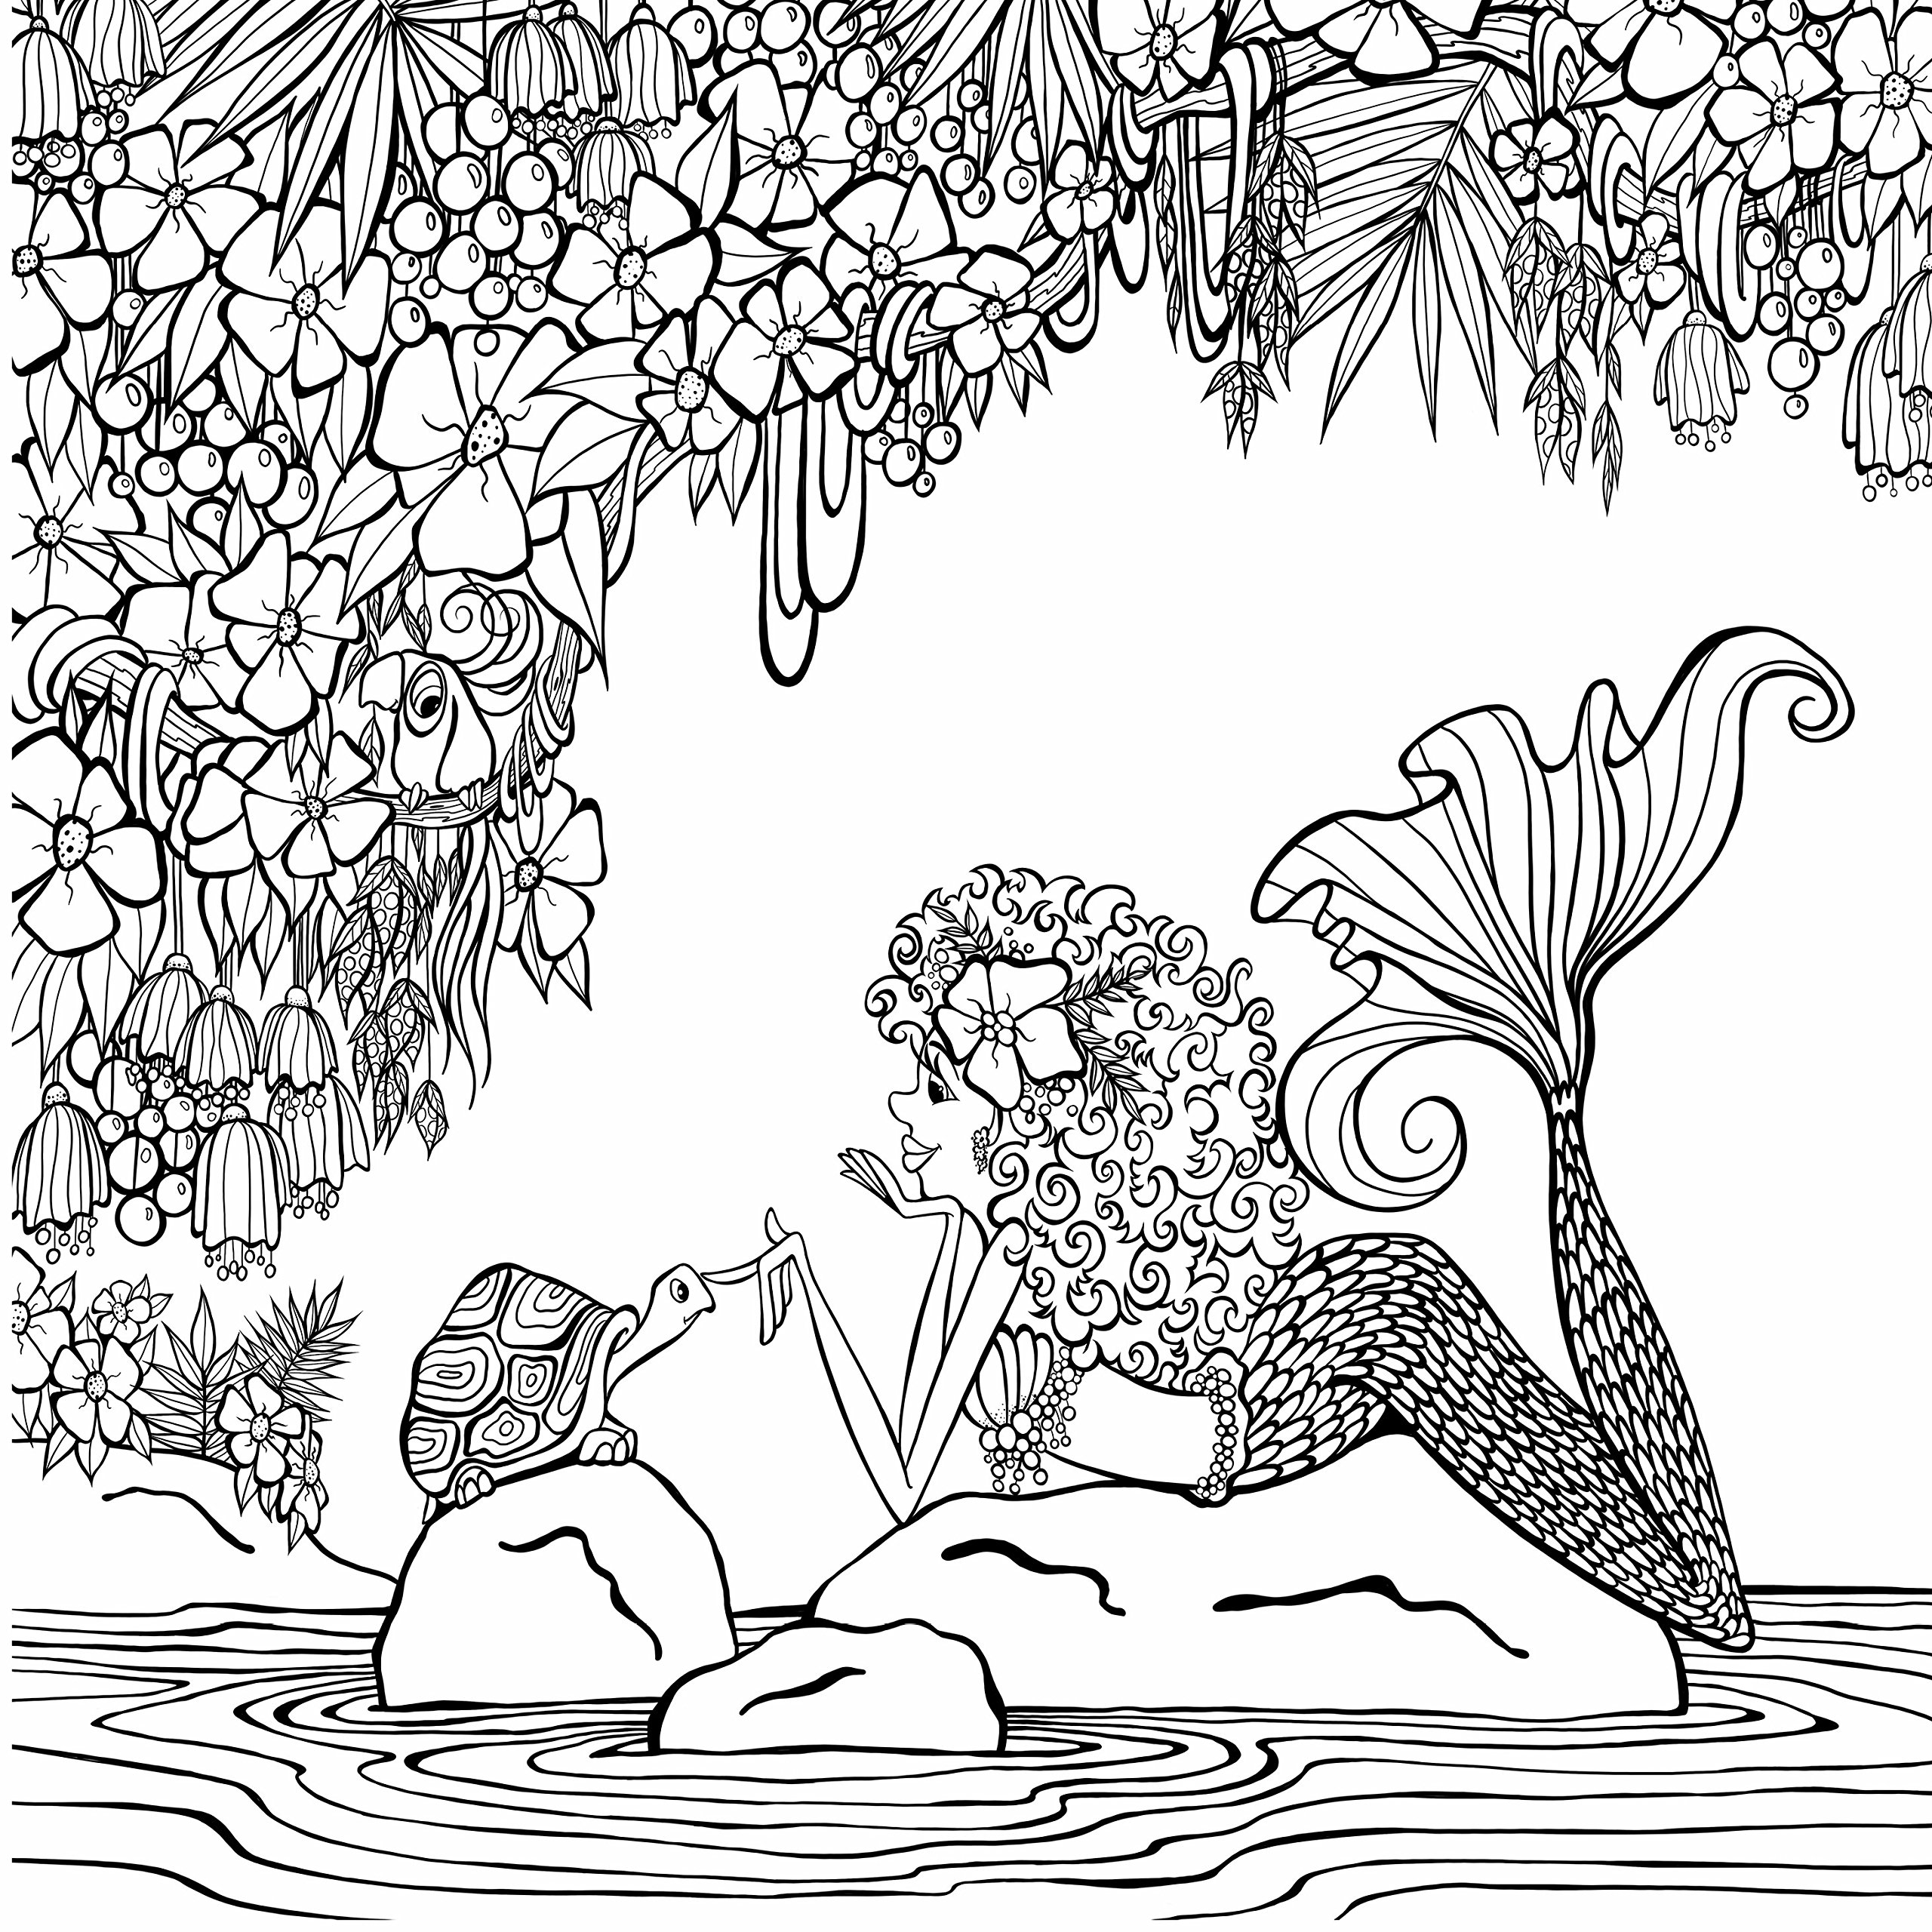 56. Found. coloring page images for 'Paradise'. 